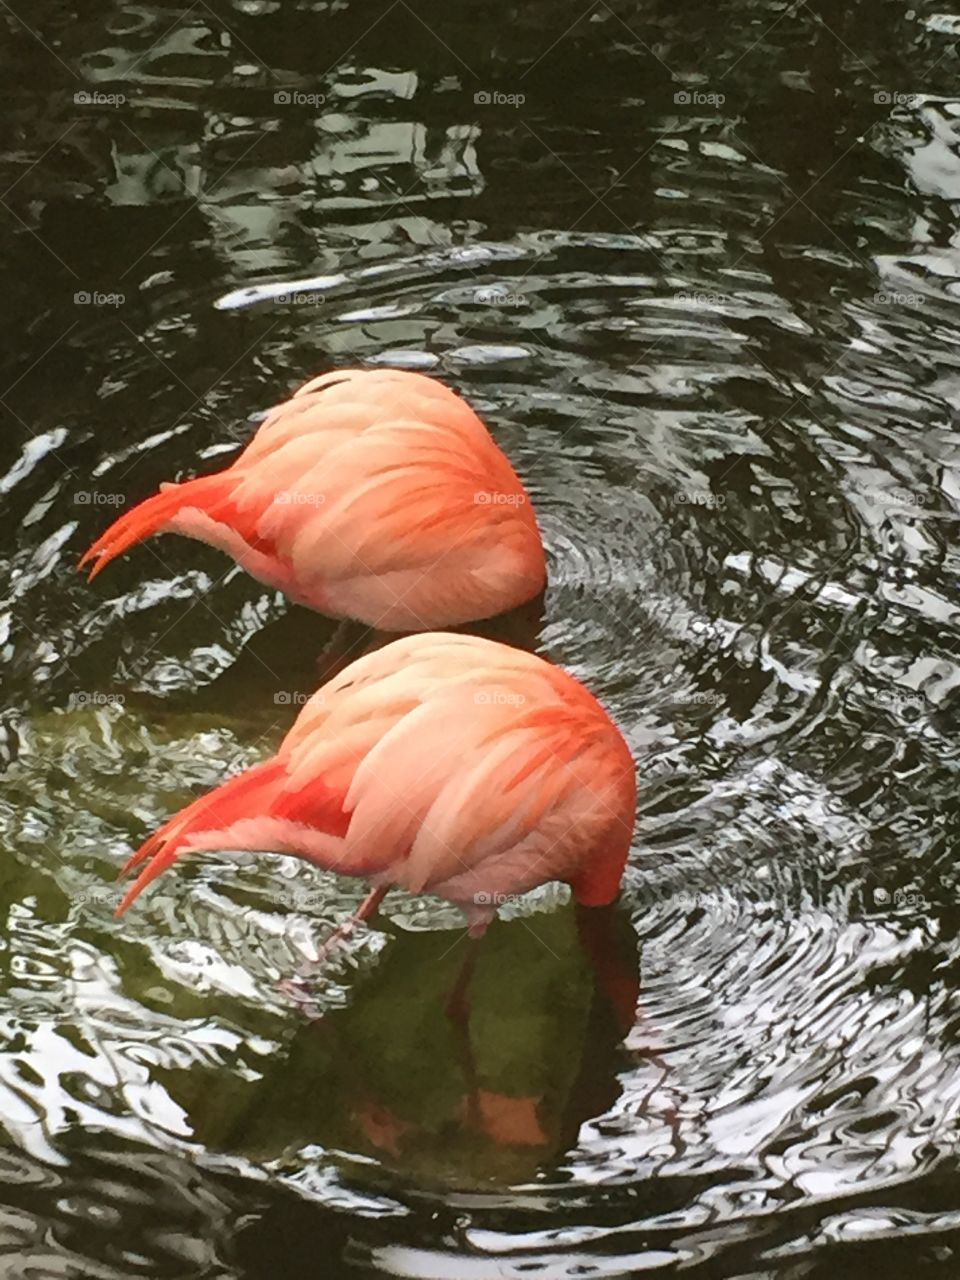 Flamingos with their heads underwater